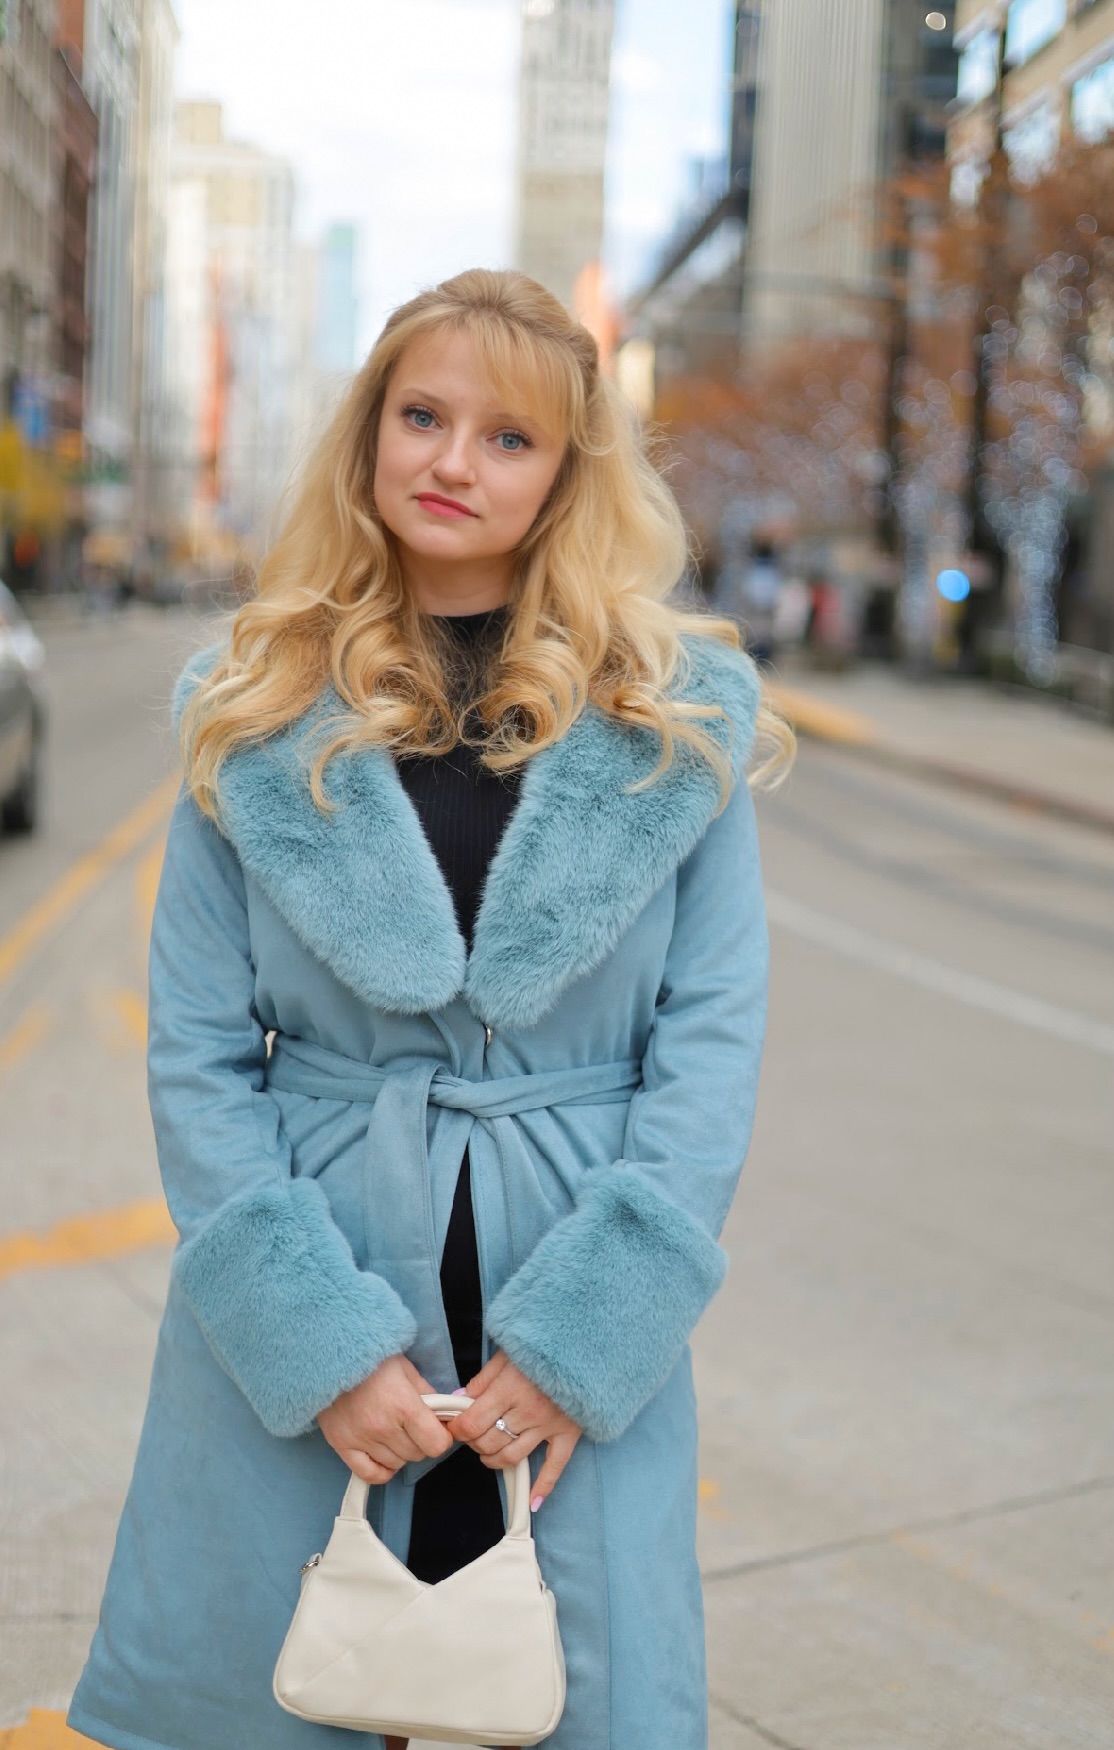 Student Iryna Hatala wearing a blue coat and carrying a small white bag